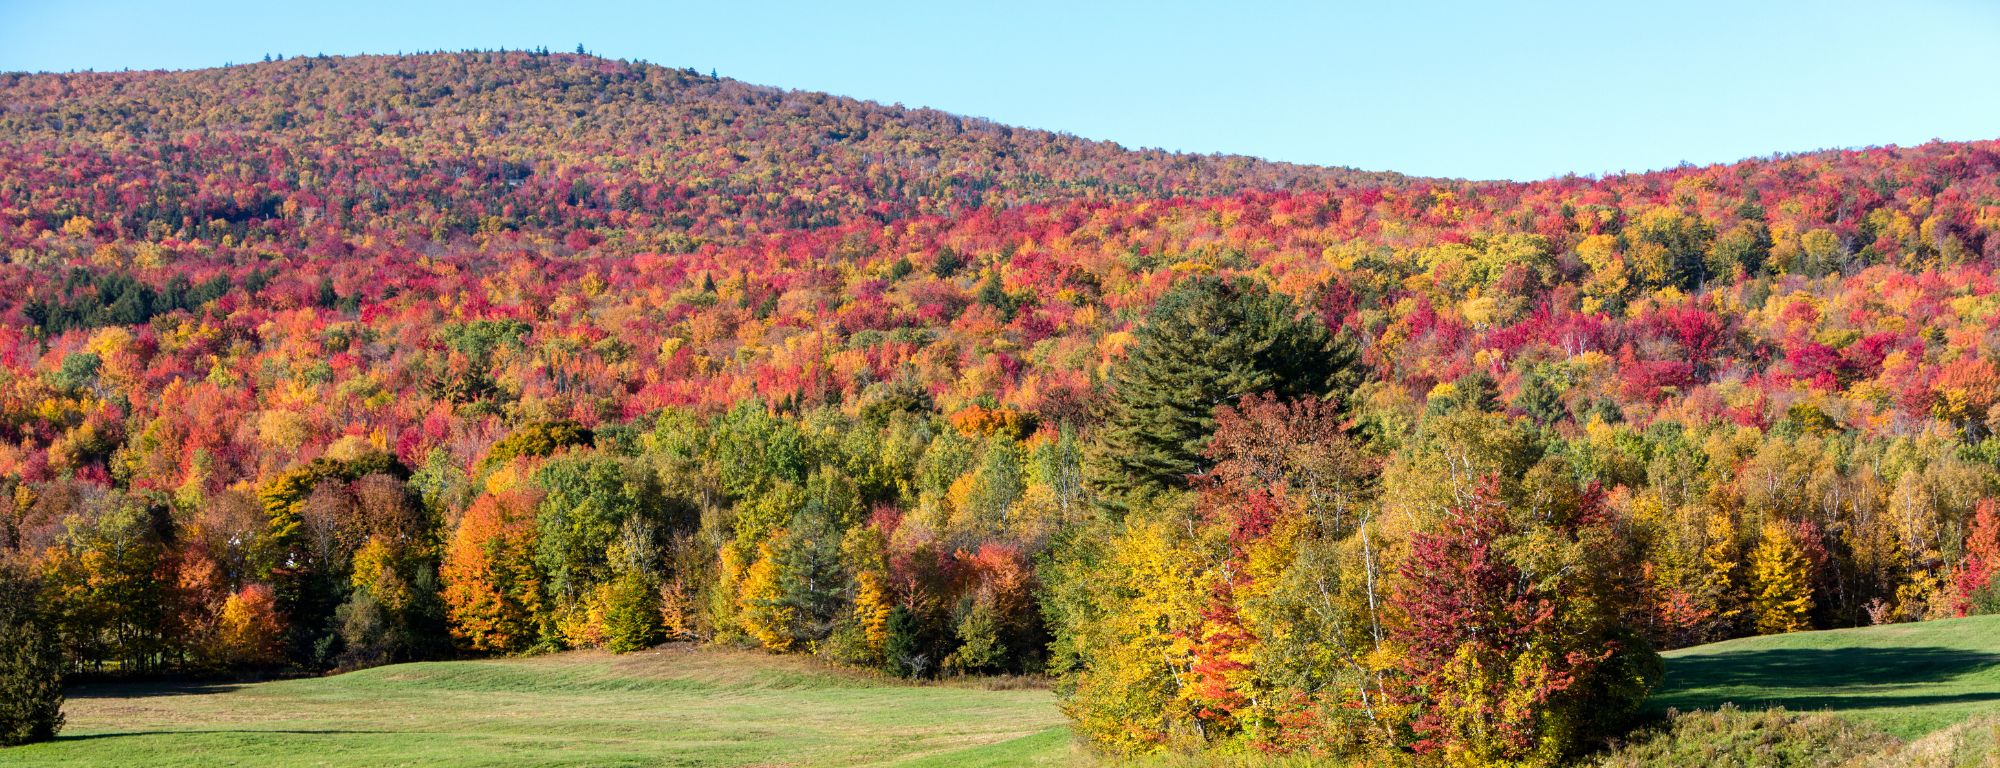 Best Scenic Drives To See Fall Foliage in Massachusetts